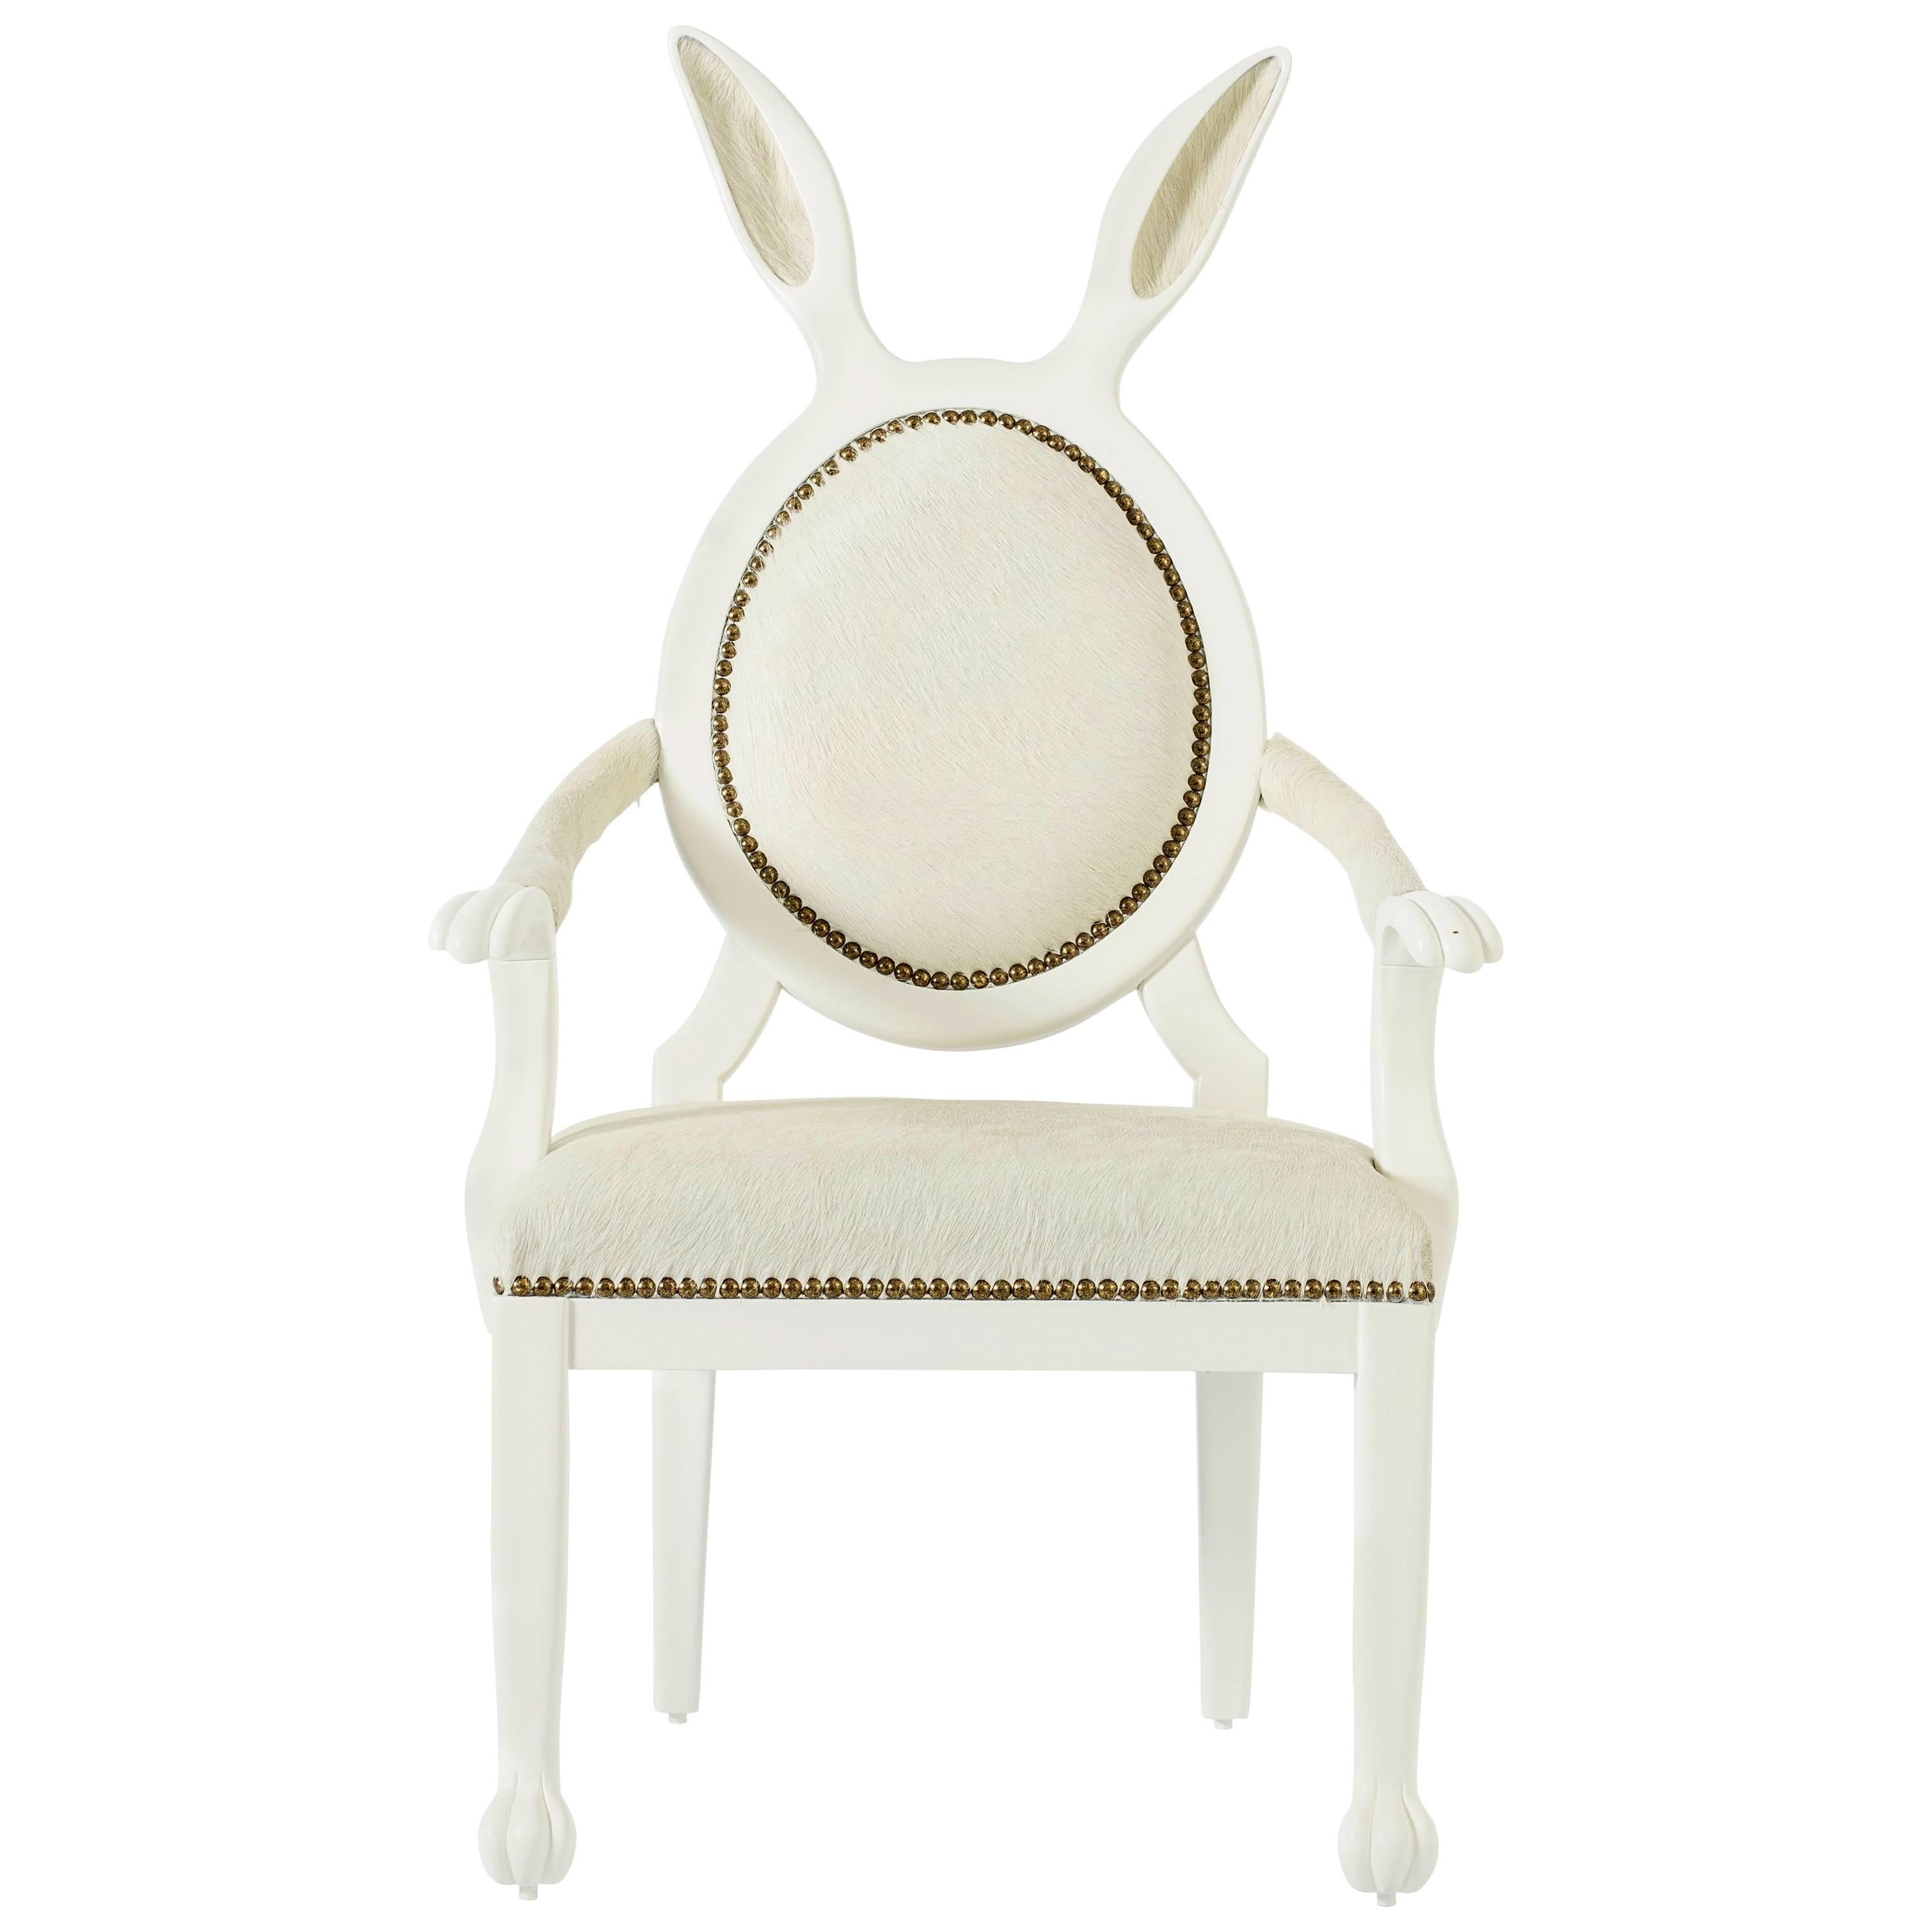 21st Century Hybrid No 2 Children's Armchair with Bunny Ears and White Leather For Sale